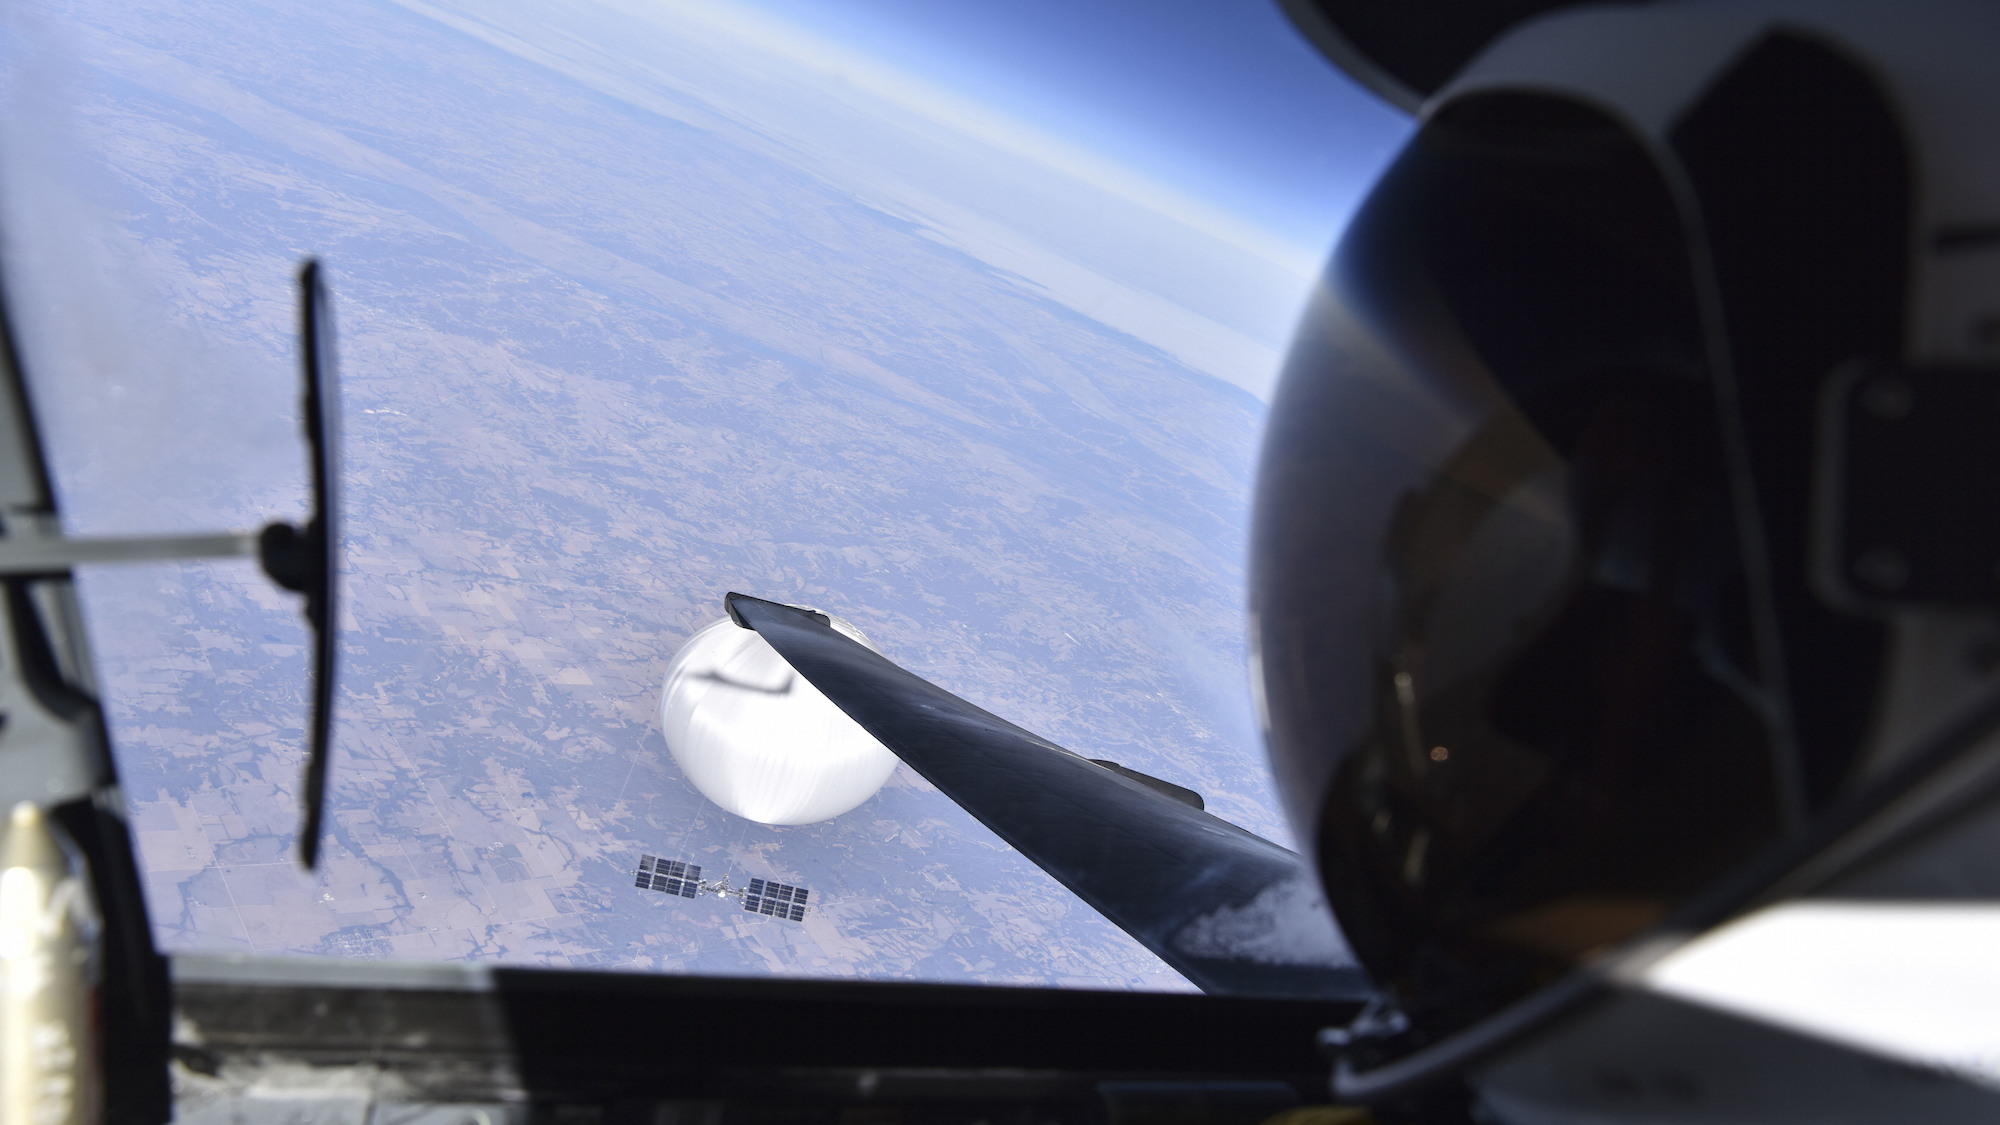 The real star of this aerial selfie isn’t the balloon—it’s the U-2 spy plane